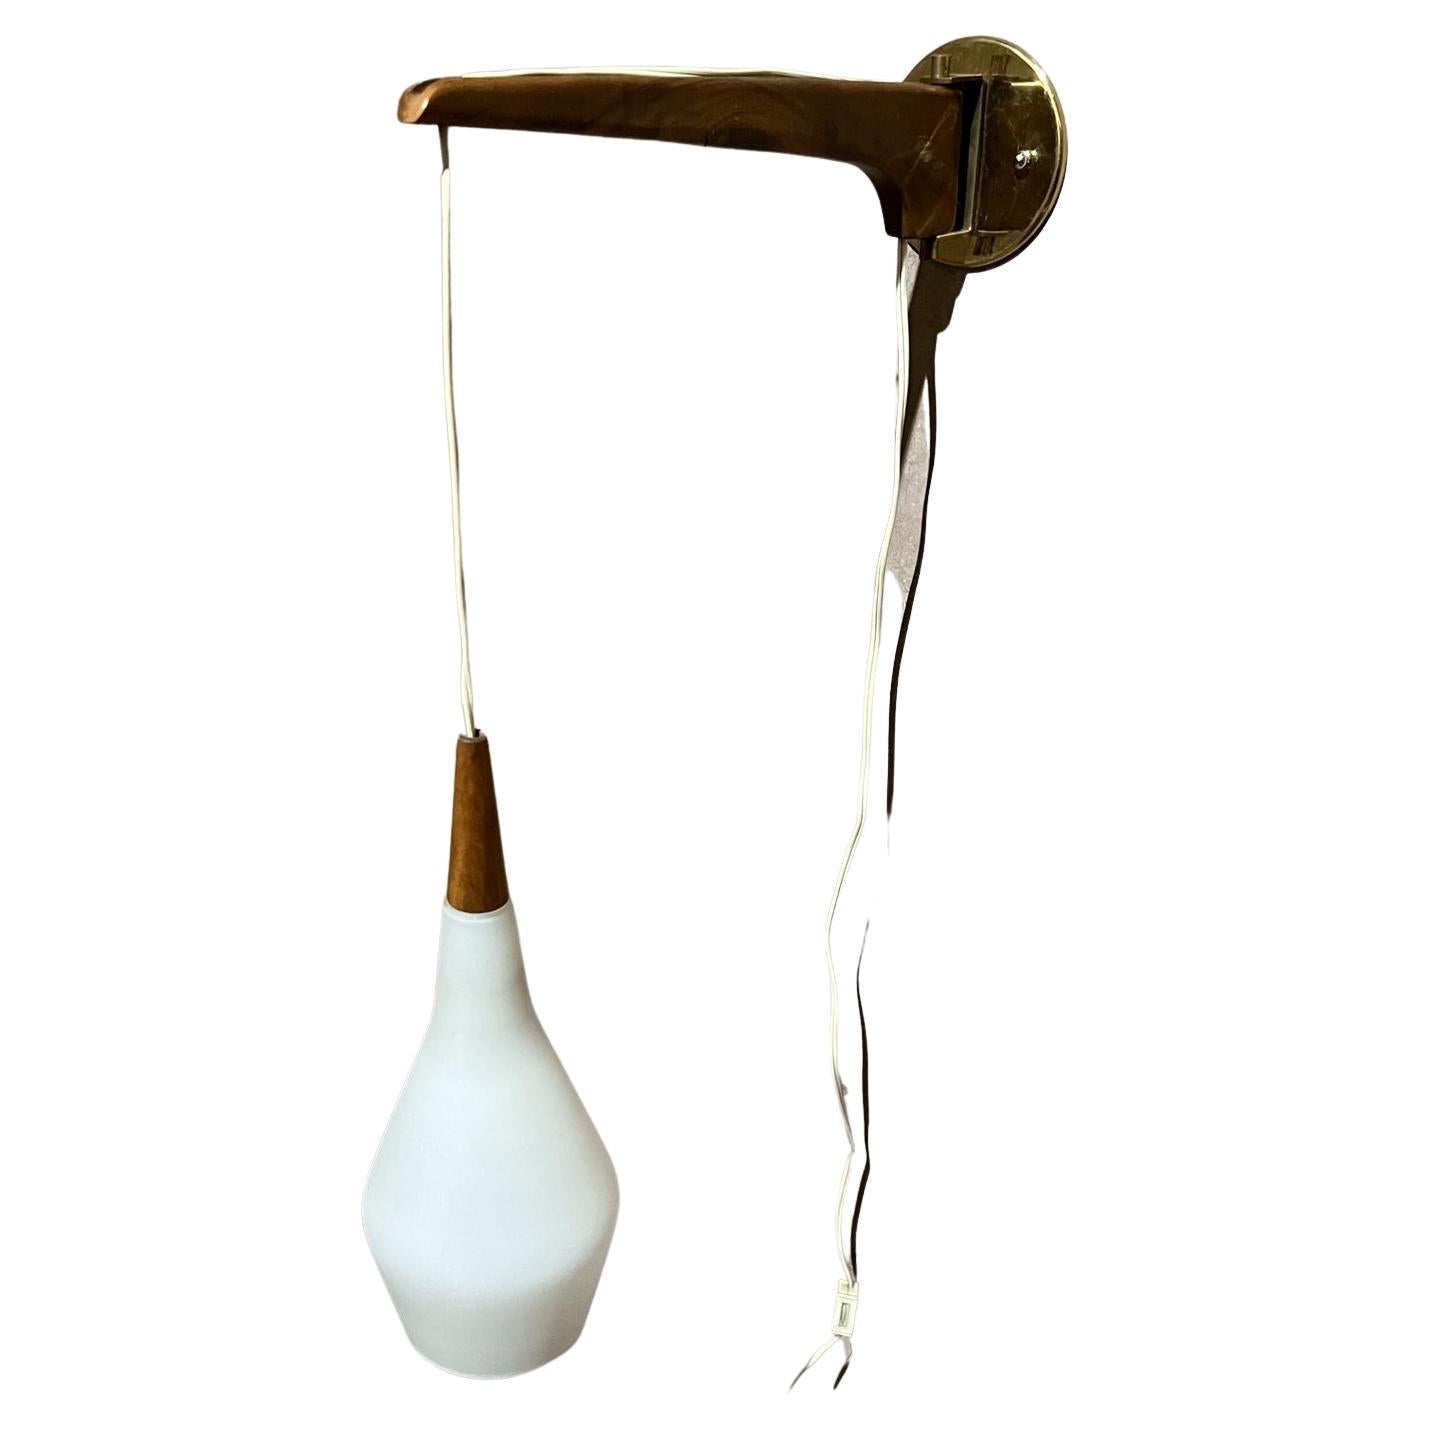 1970s Scandinavian Modern Wall Sconce Swag Pendant Teakwood Frosted Glass
Unmarked, in the style of Finnish designer Lisa Johansson-Pape.
Adjustable height and swiveling angle.
16 d x4 w shade h 13 adjustable
Preowned original vintage condition.
See